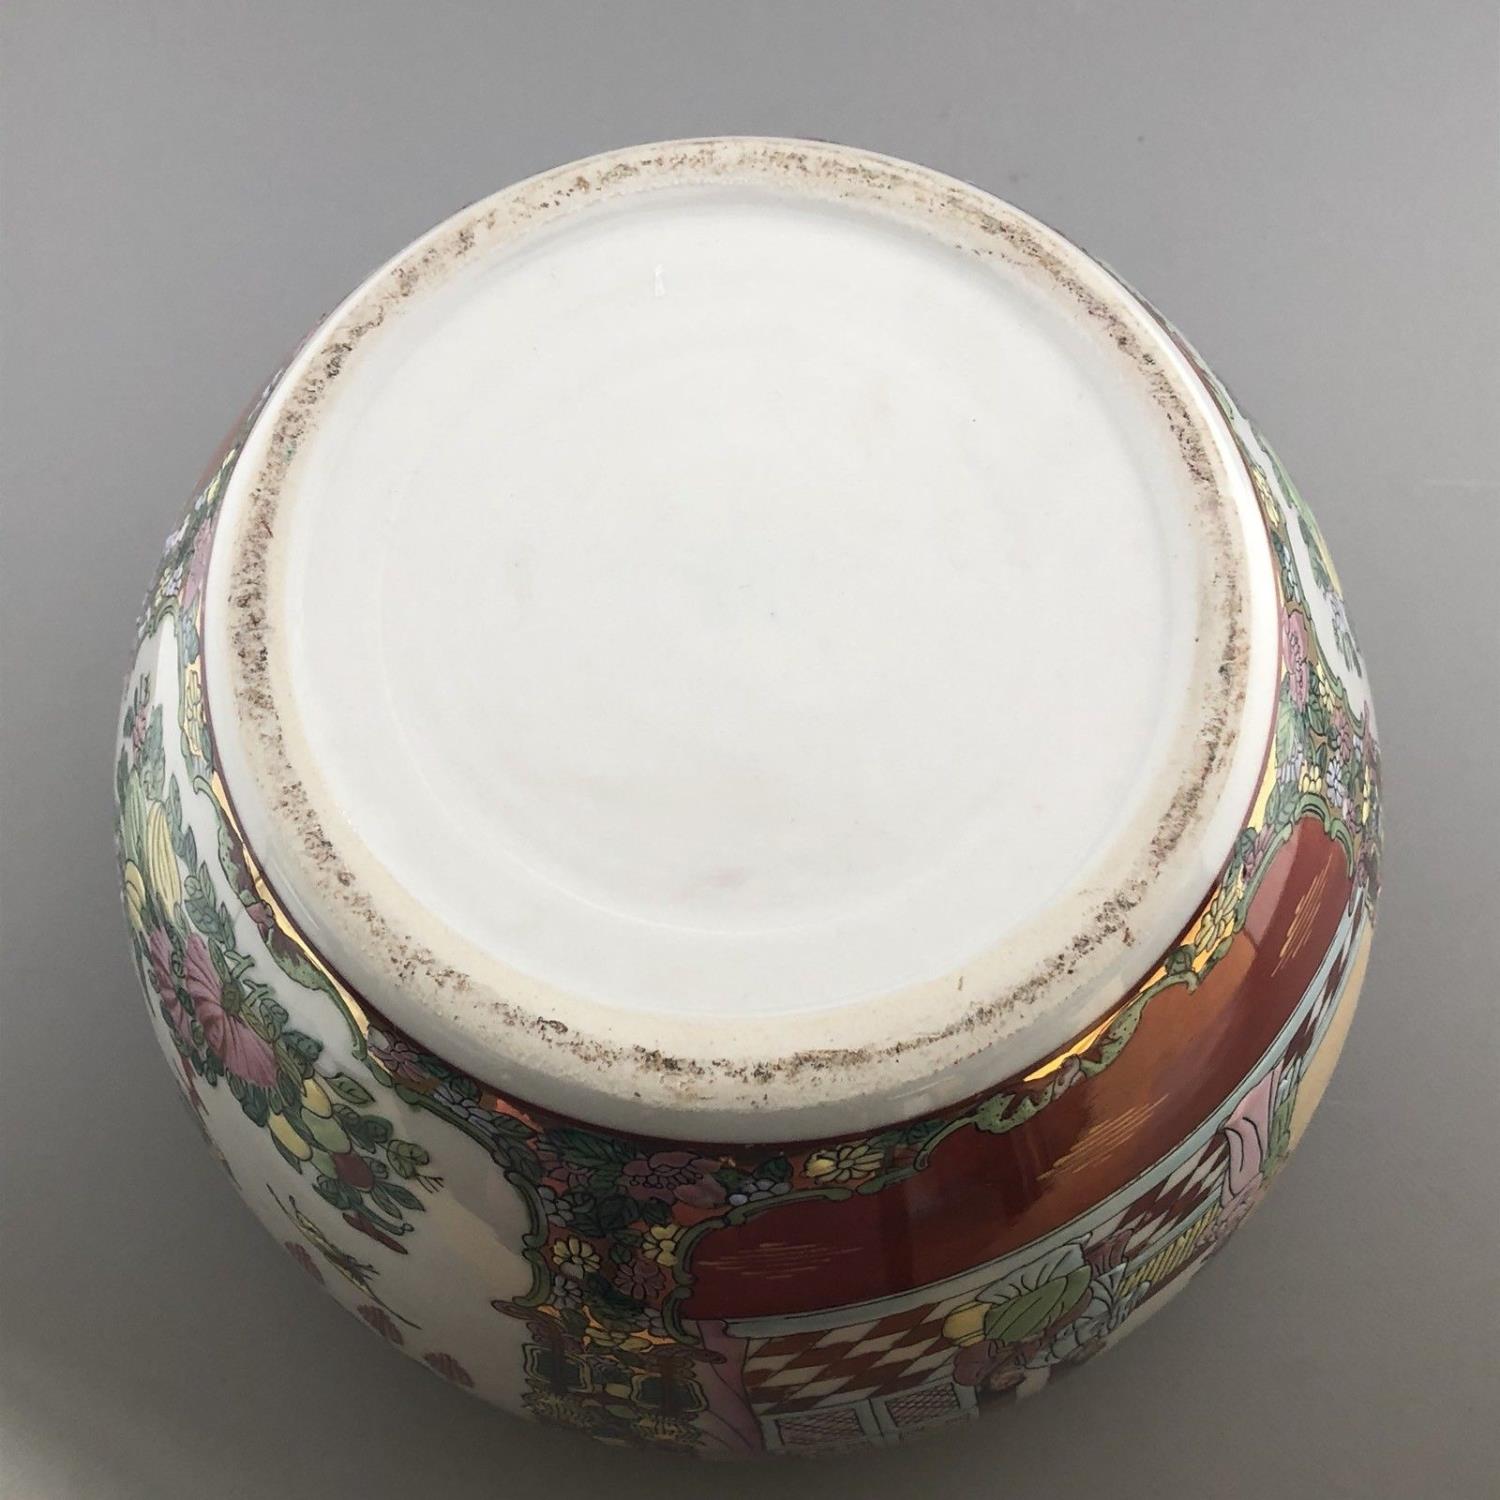 A Large Enamelled Chinese Plant Pot Jardiniere with Fish Bowl Koi Carp Interior - Image 6 of 7